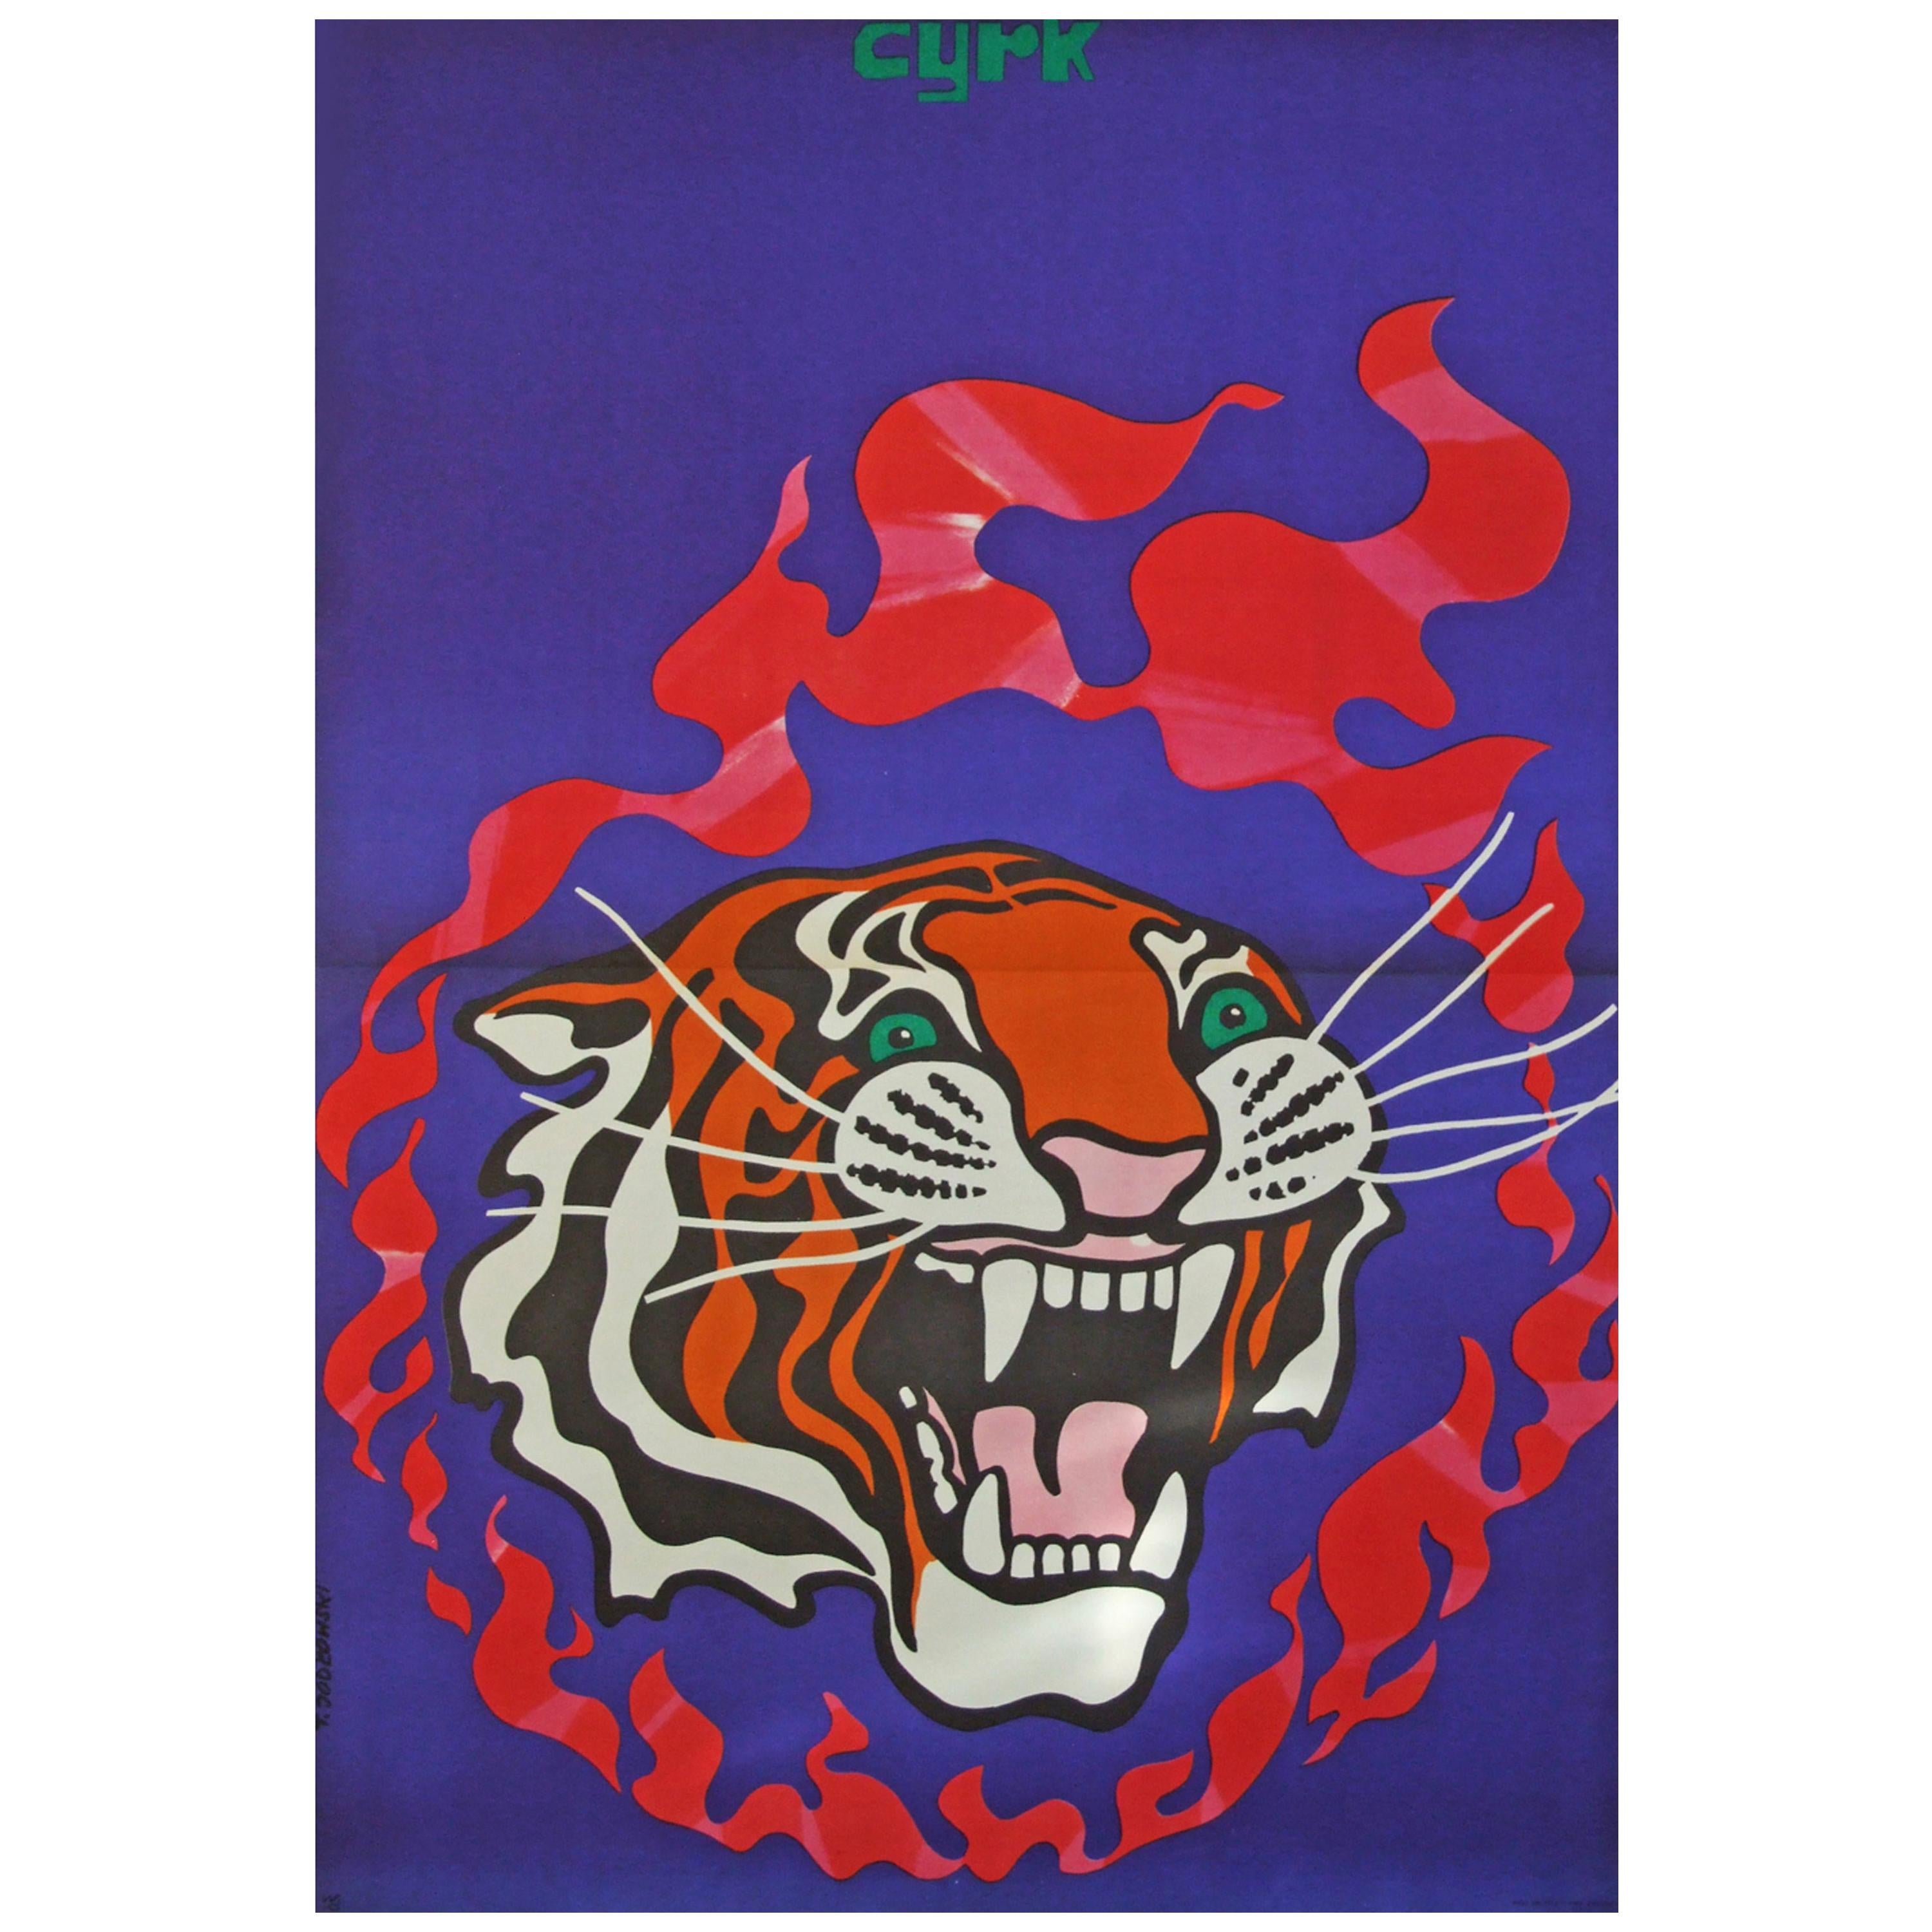 Original 1970 polish circus promotional poster designed by Tadeusz Jodlowsky.

First edition color offset lithograph.

Folded as originally issued.

Measures: L 96cm x W 67cm.